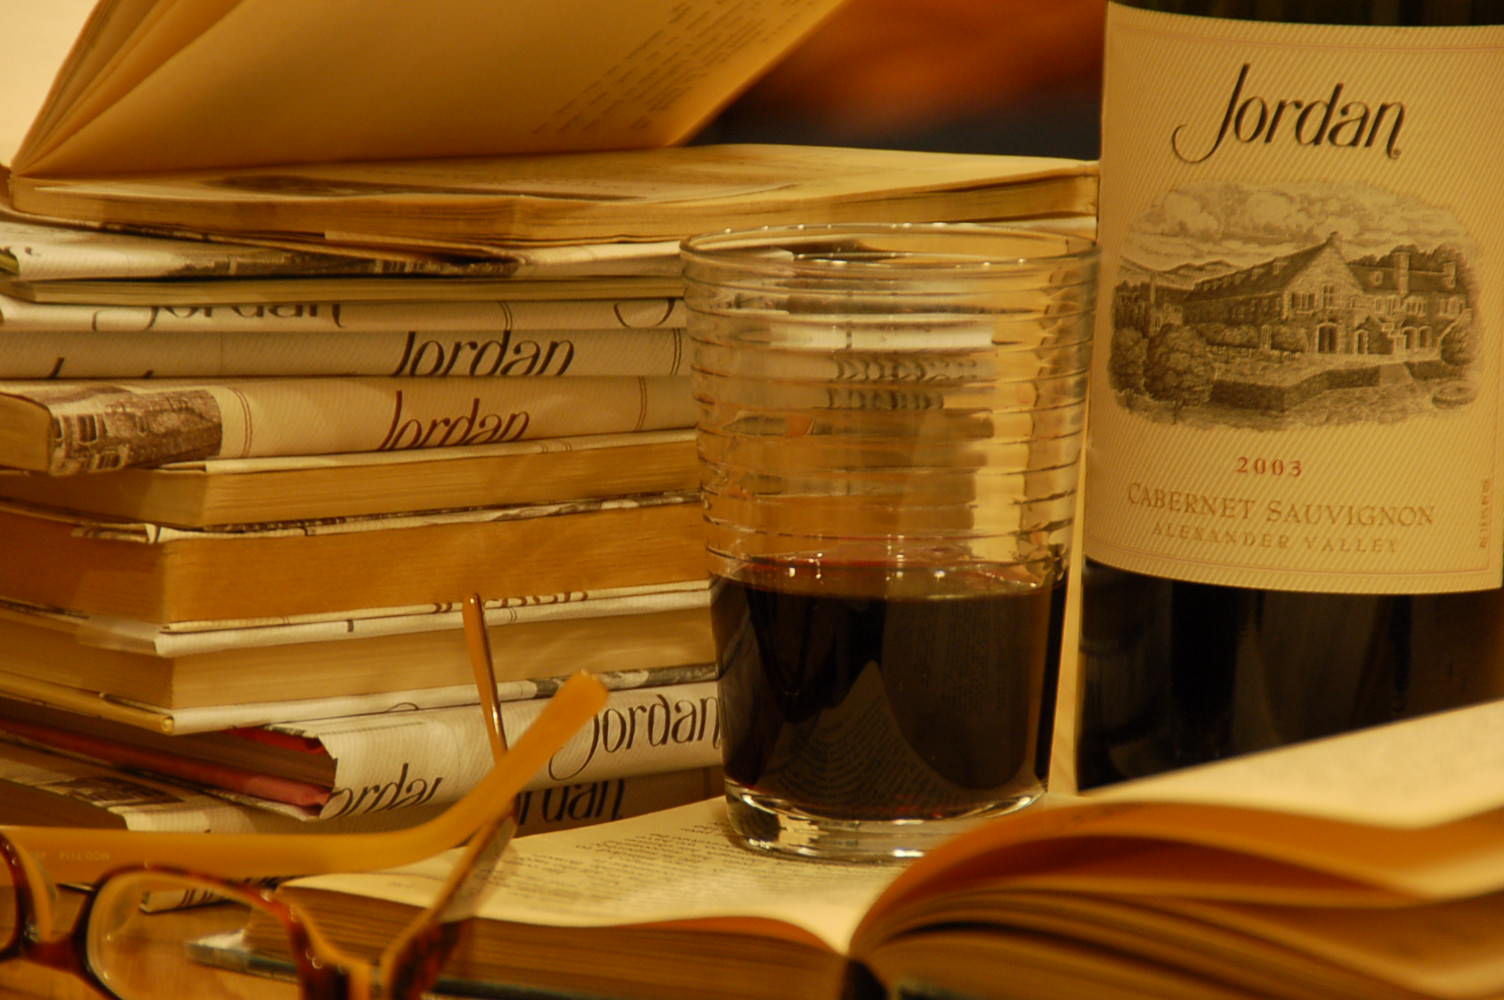 "Wine Literacy" a photo of a bottle of 2003 cabernet next to a poured glass surrounded by stacks of books covered with Jordan Winery labels by Jordan Catapano - Jordan Winery Celebrating Family with Jordan photo contest grand prize winner